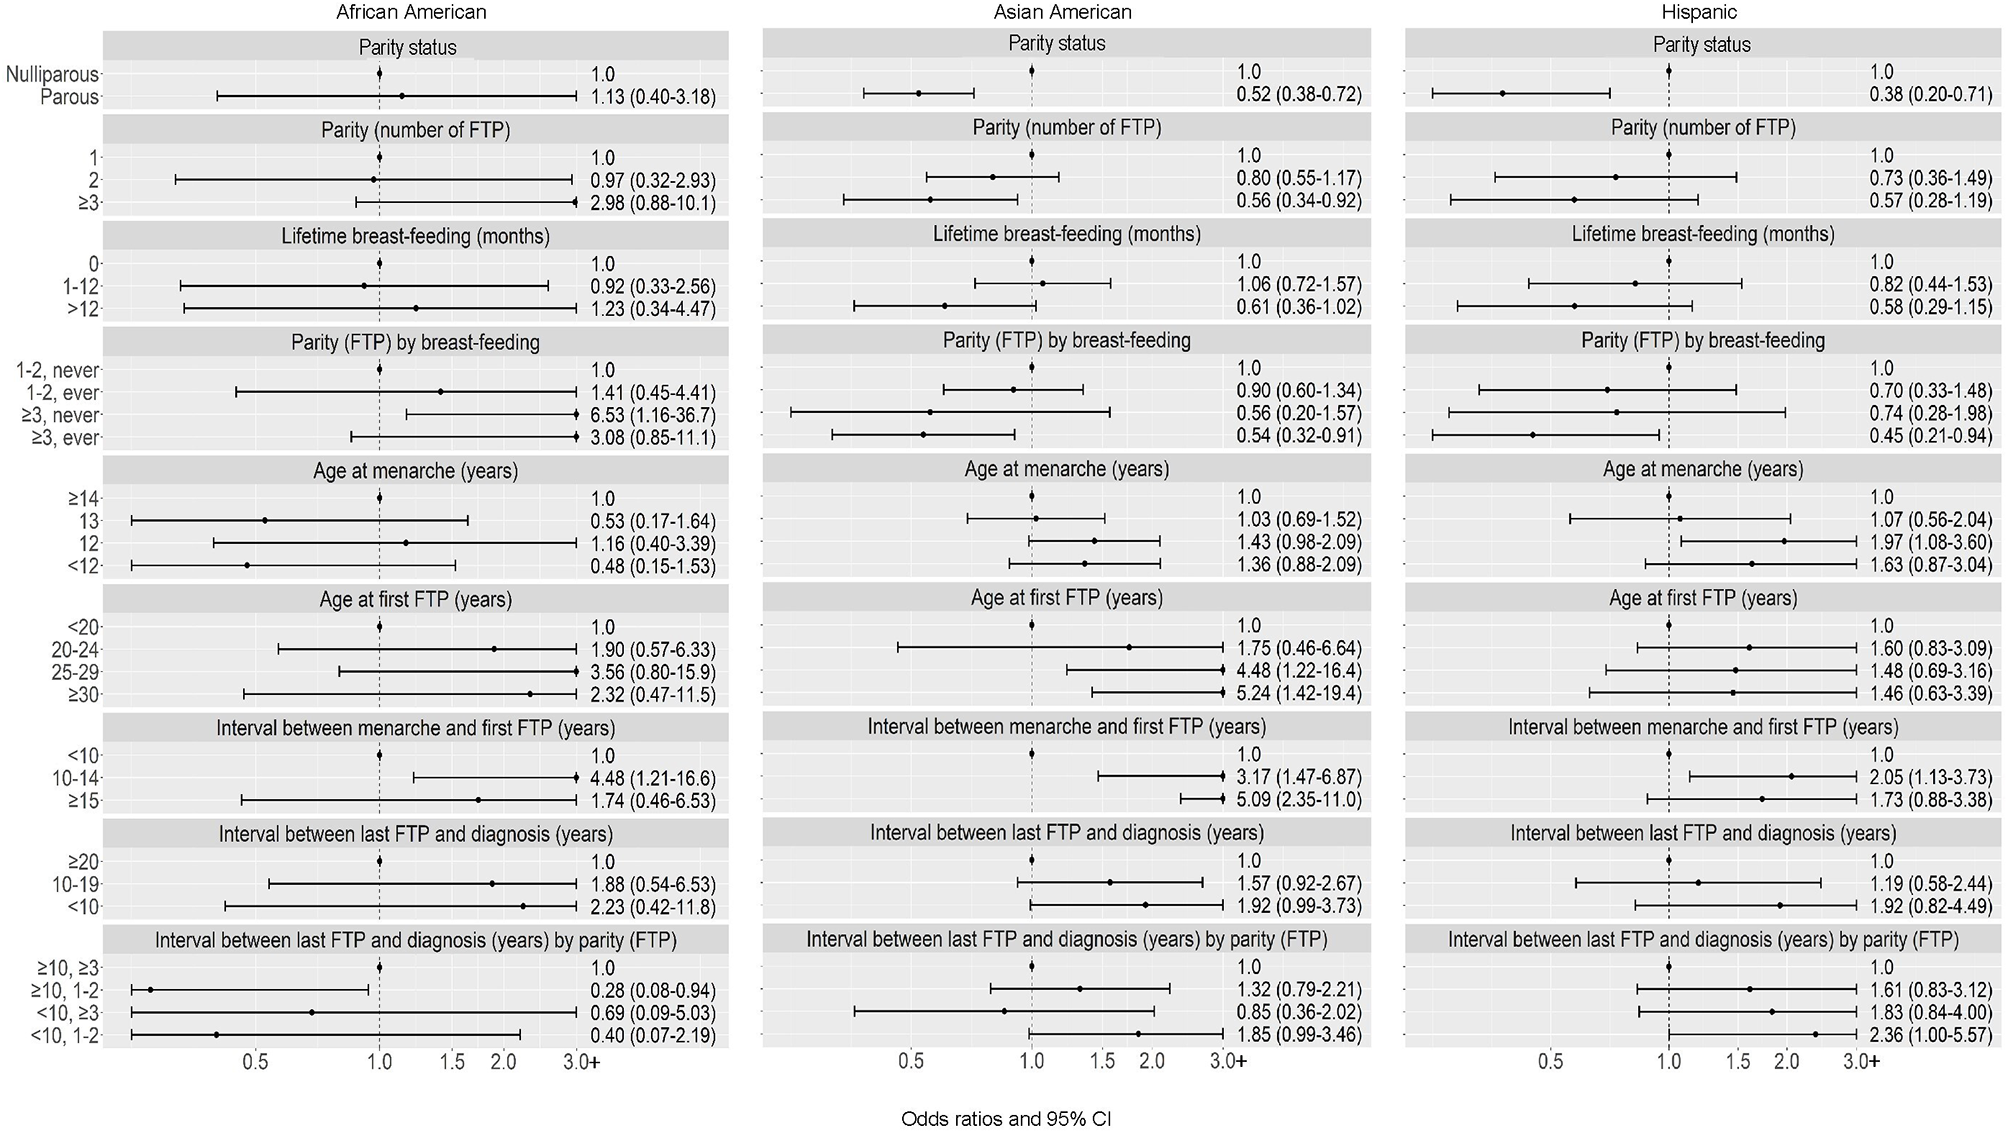 Reproductive characteristics, menopausal status, race and ethnicity, and risk of breast cancer subtypes defined by ER, PR and HER2 status: the Breast Cancer Etiology in Minorities study